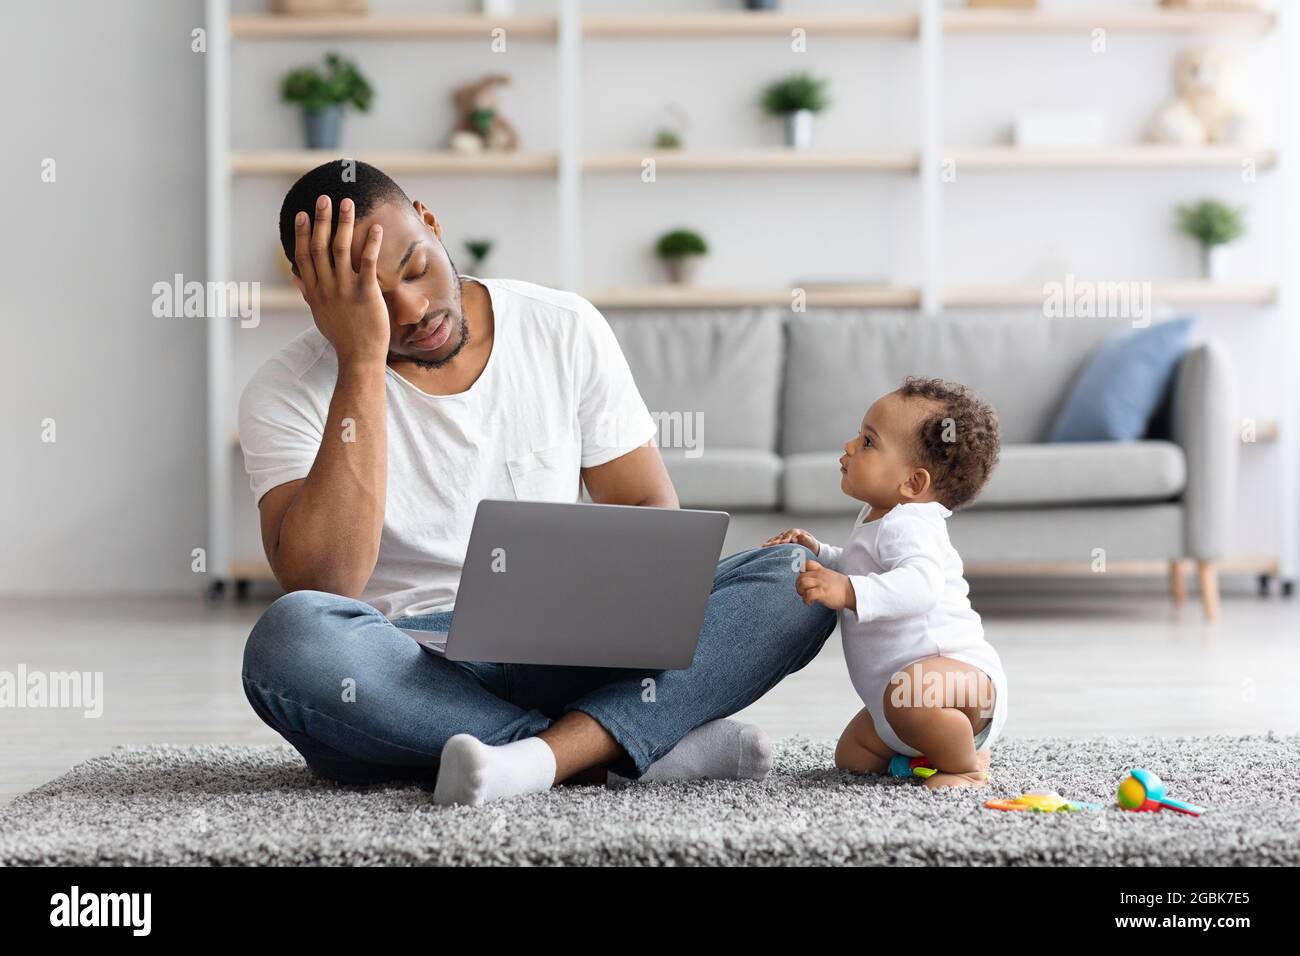 Stressed Black Man Trying To Work With Laptop While Baby Distracting Him Stock Photo